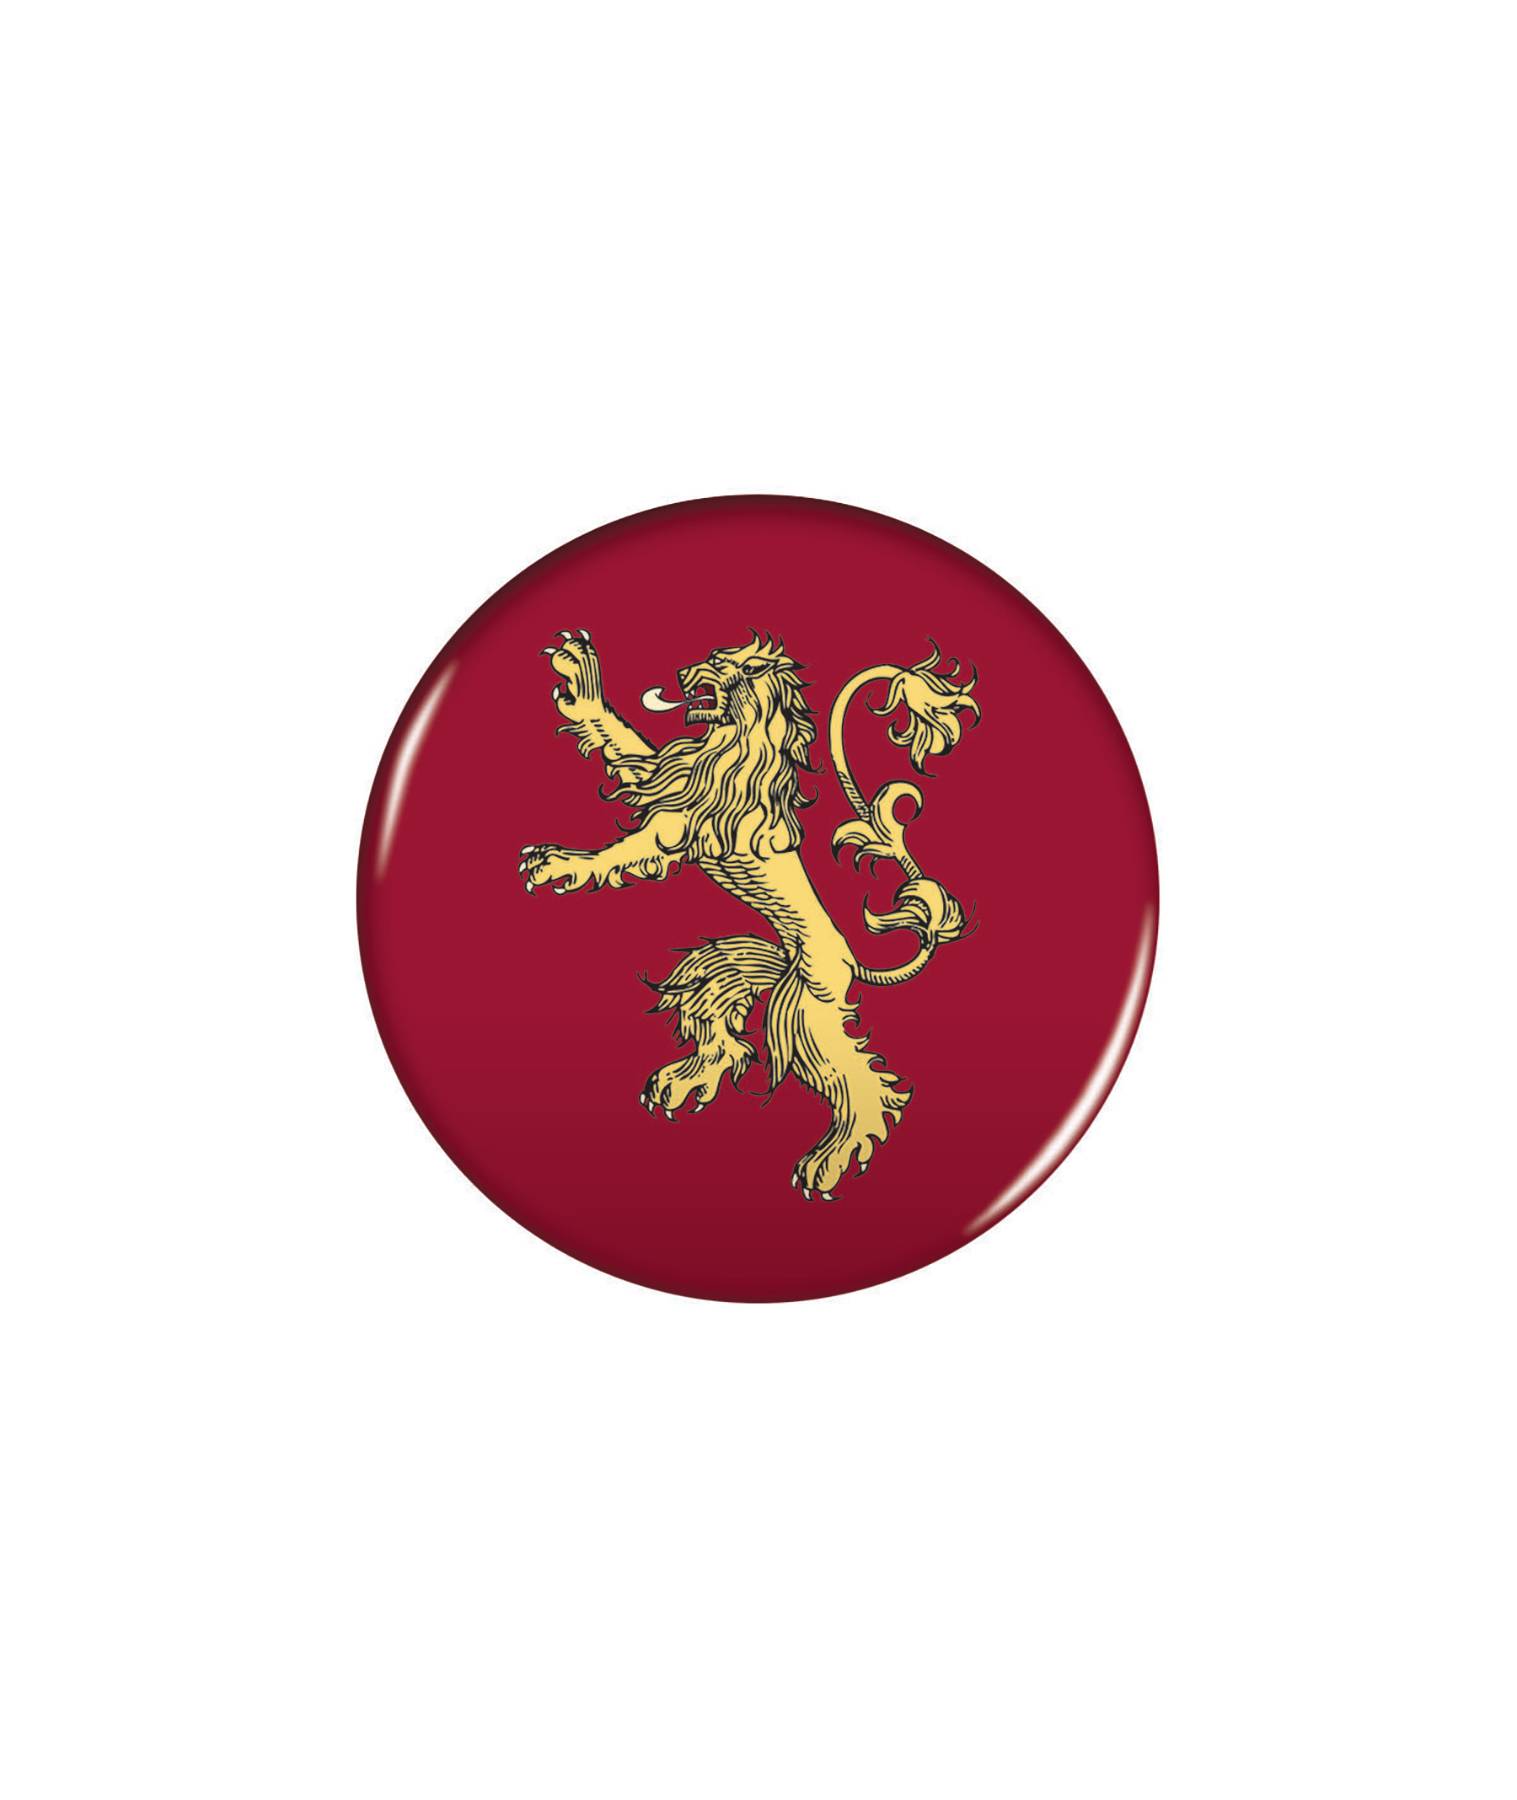 GAME OF THRONES MAGNET 2.25 IN LANNISTER